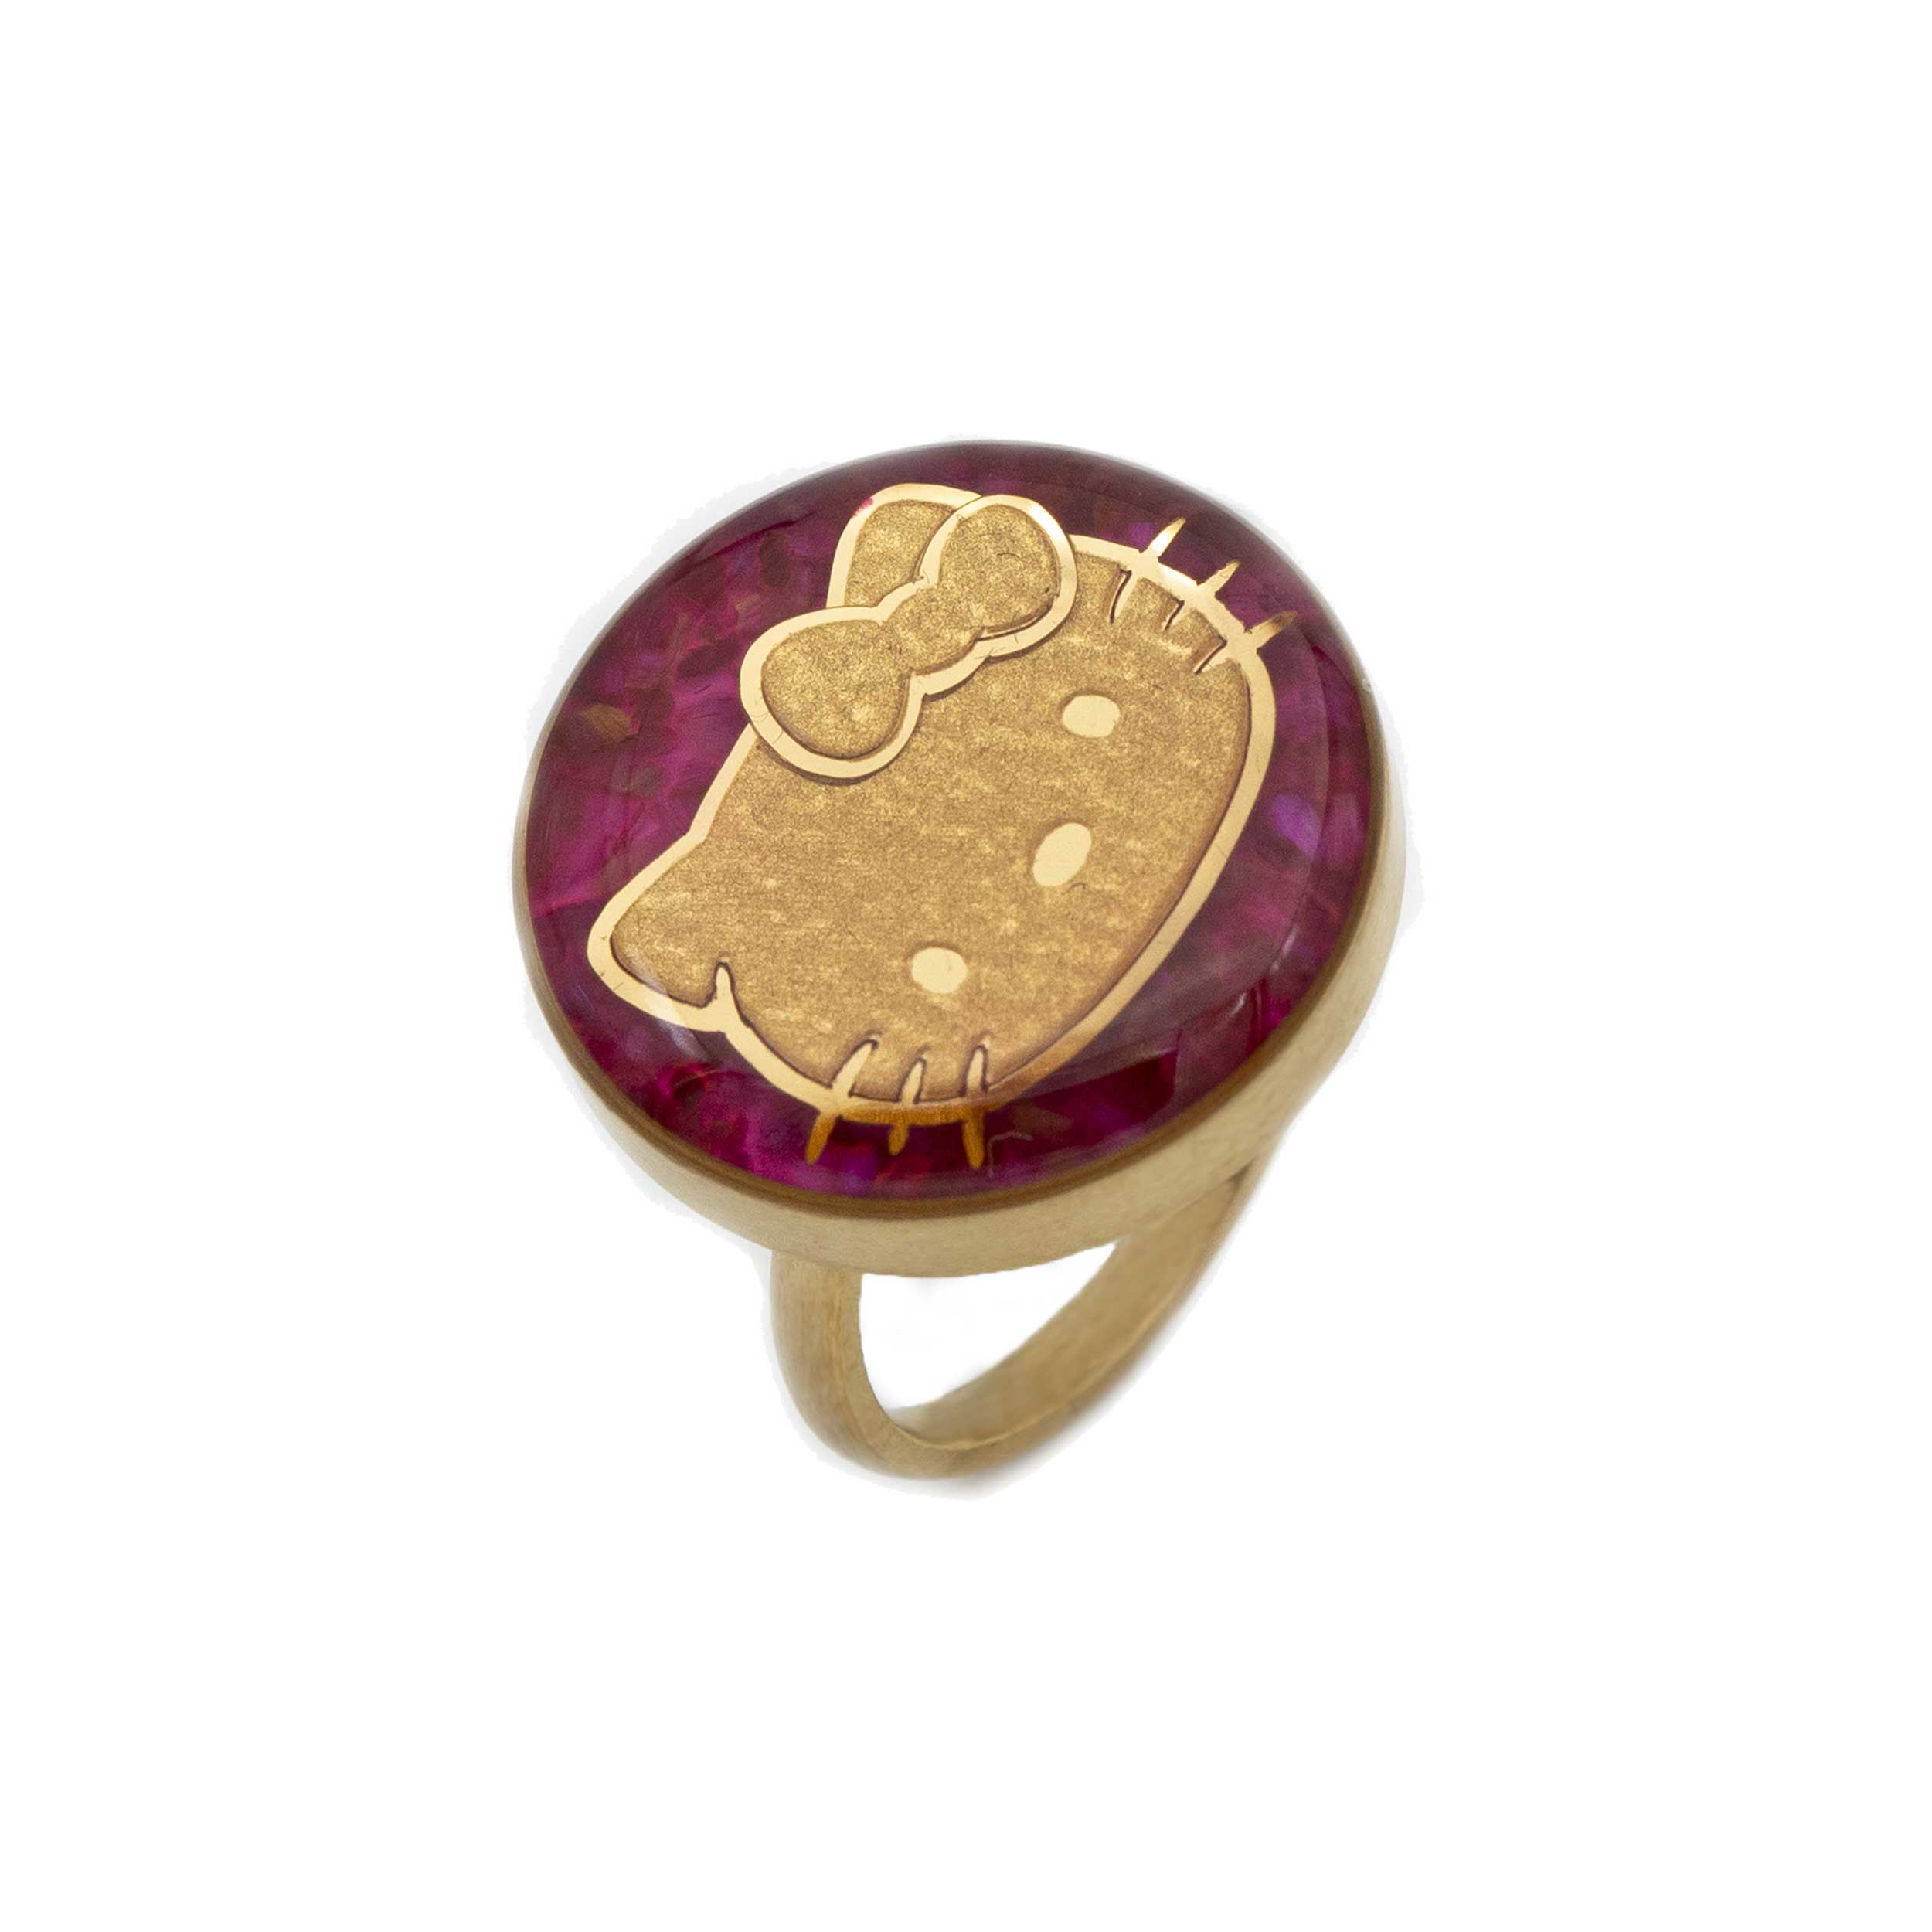 Pink agate ring and 24 carat gold leaf Kitty design